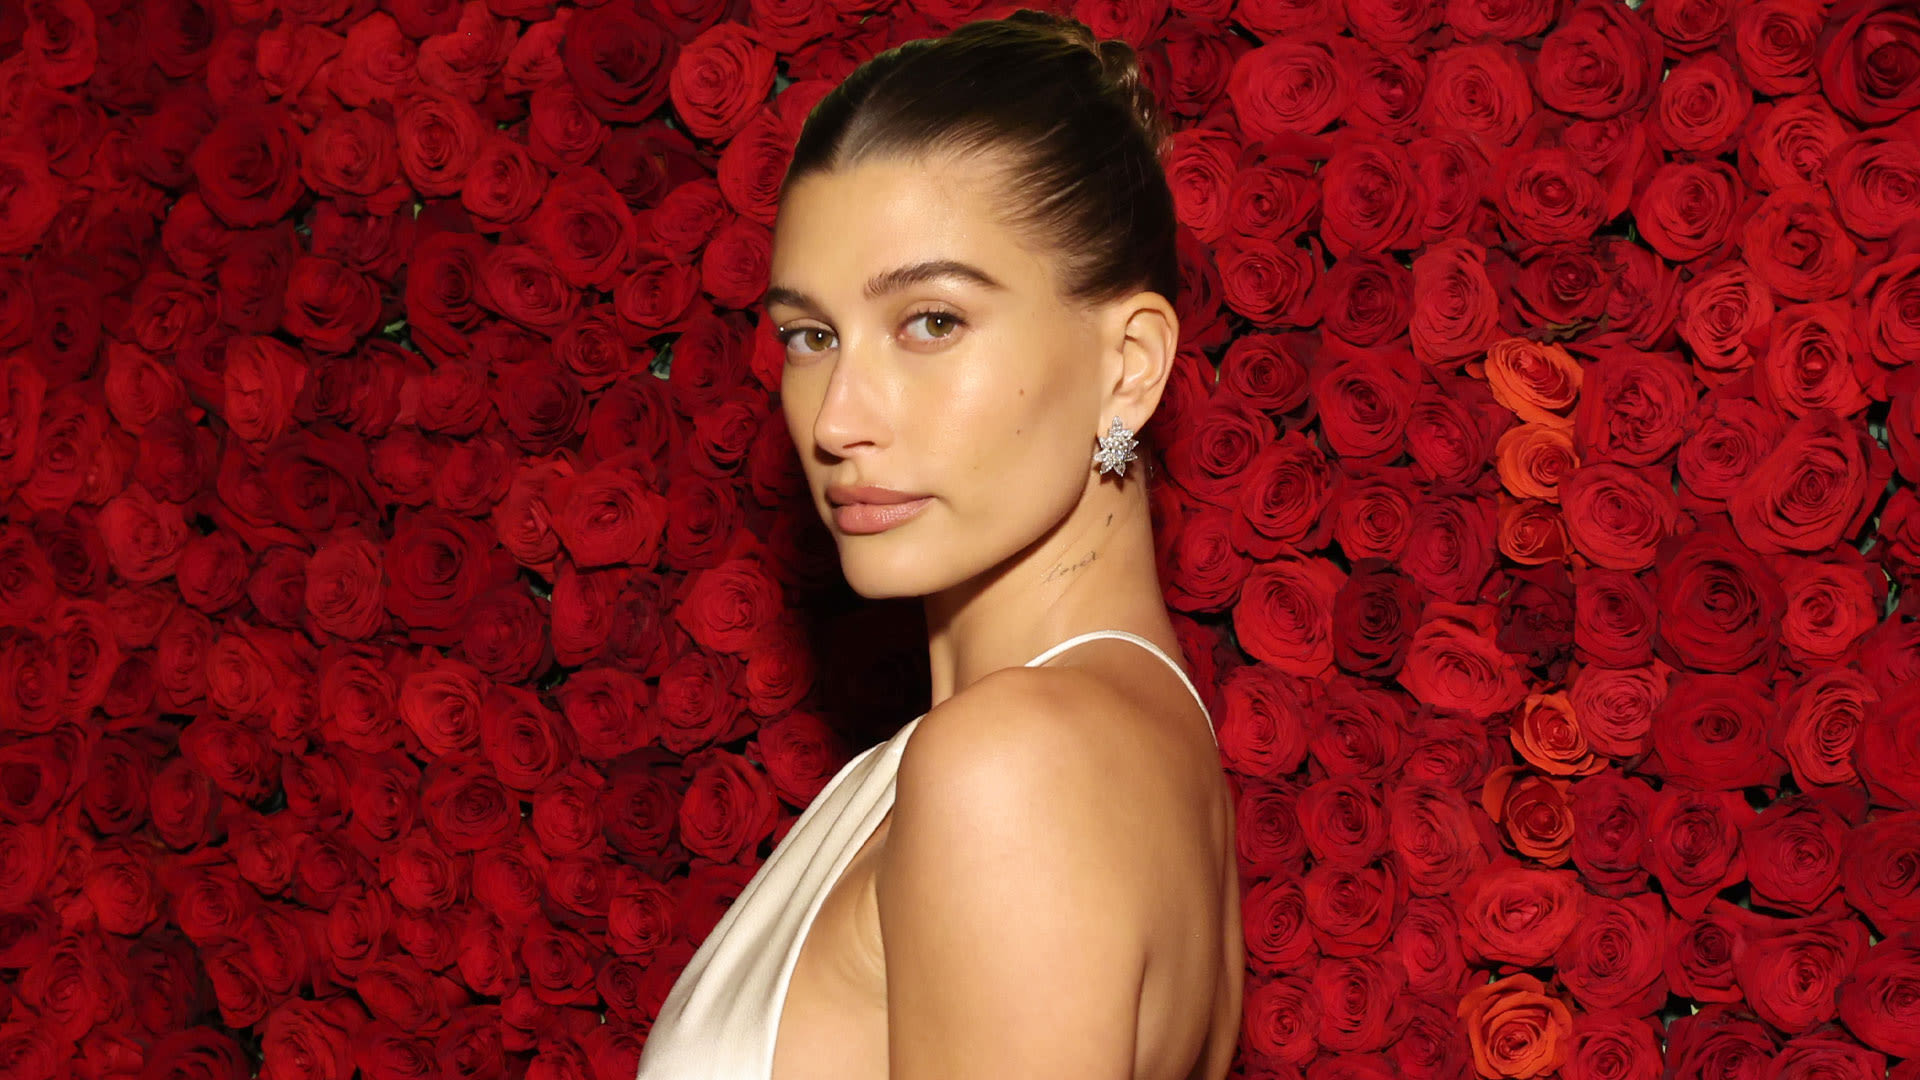 Hailey Bieber fans will know 'for sure' if she's pregnant at major event